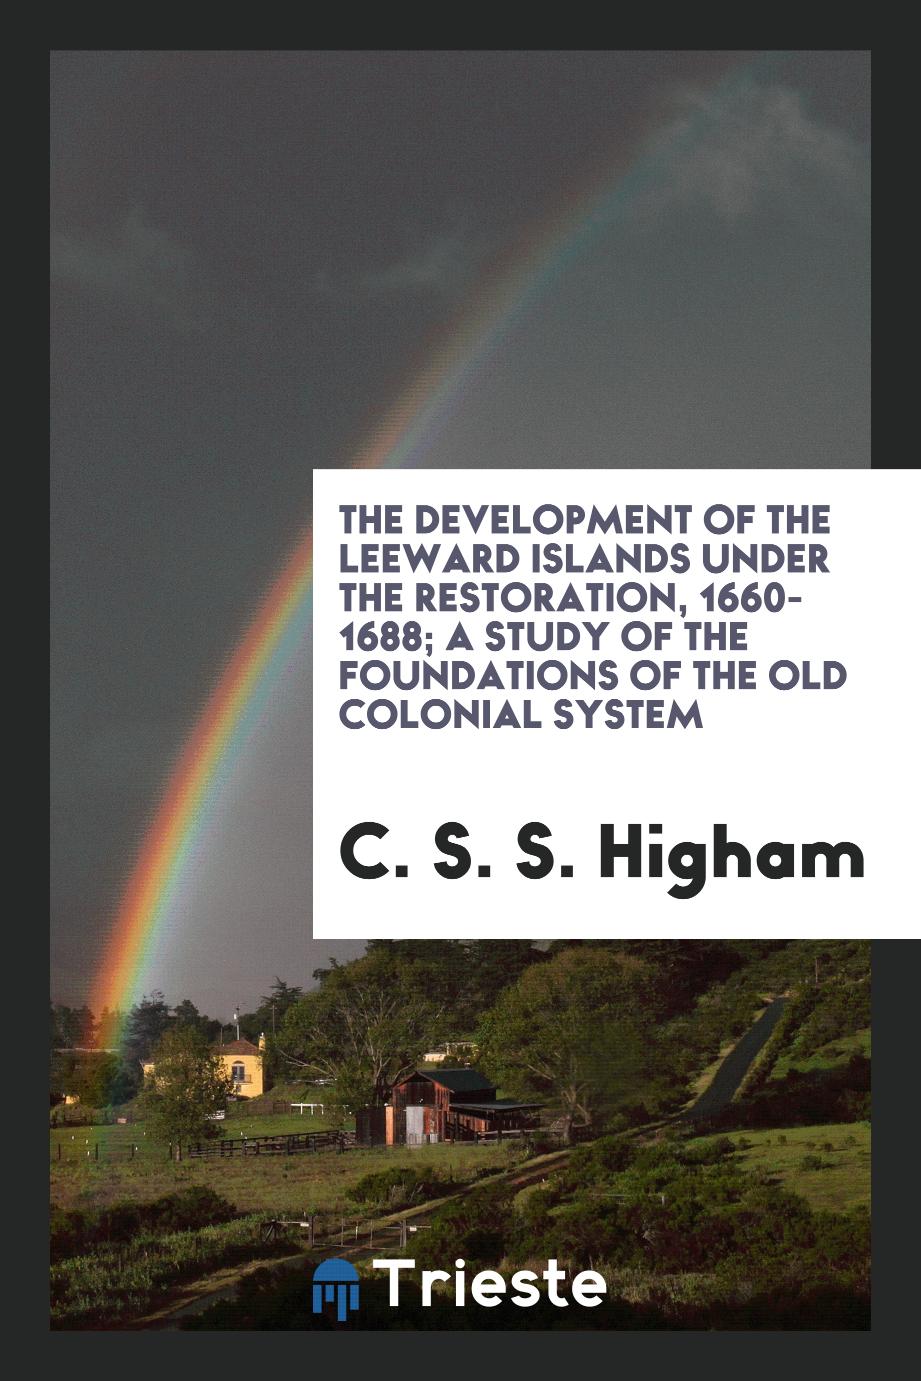 The development of the Leeward Islands under the Restoration, 1660-1688; a study of the foundations of the old colonial system